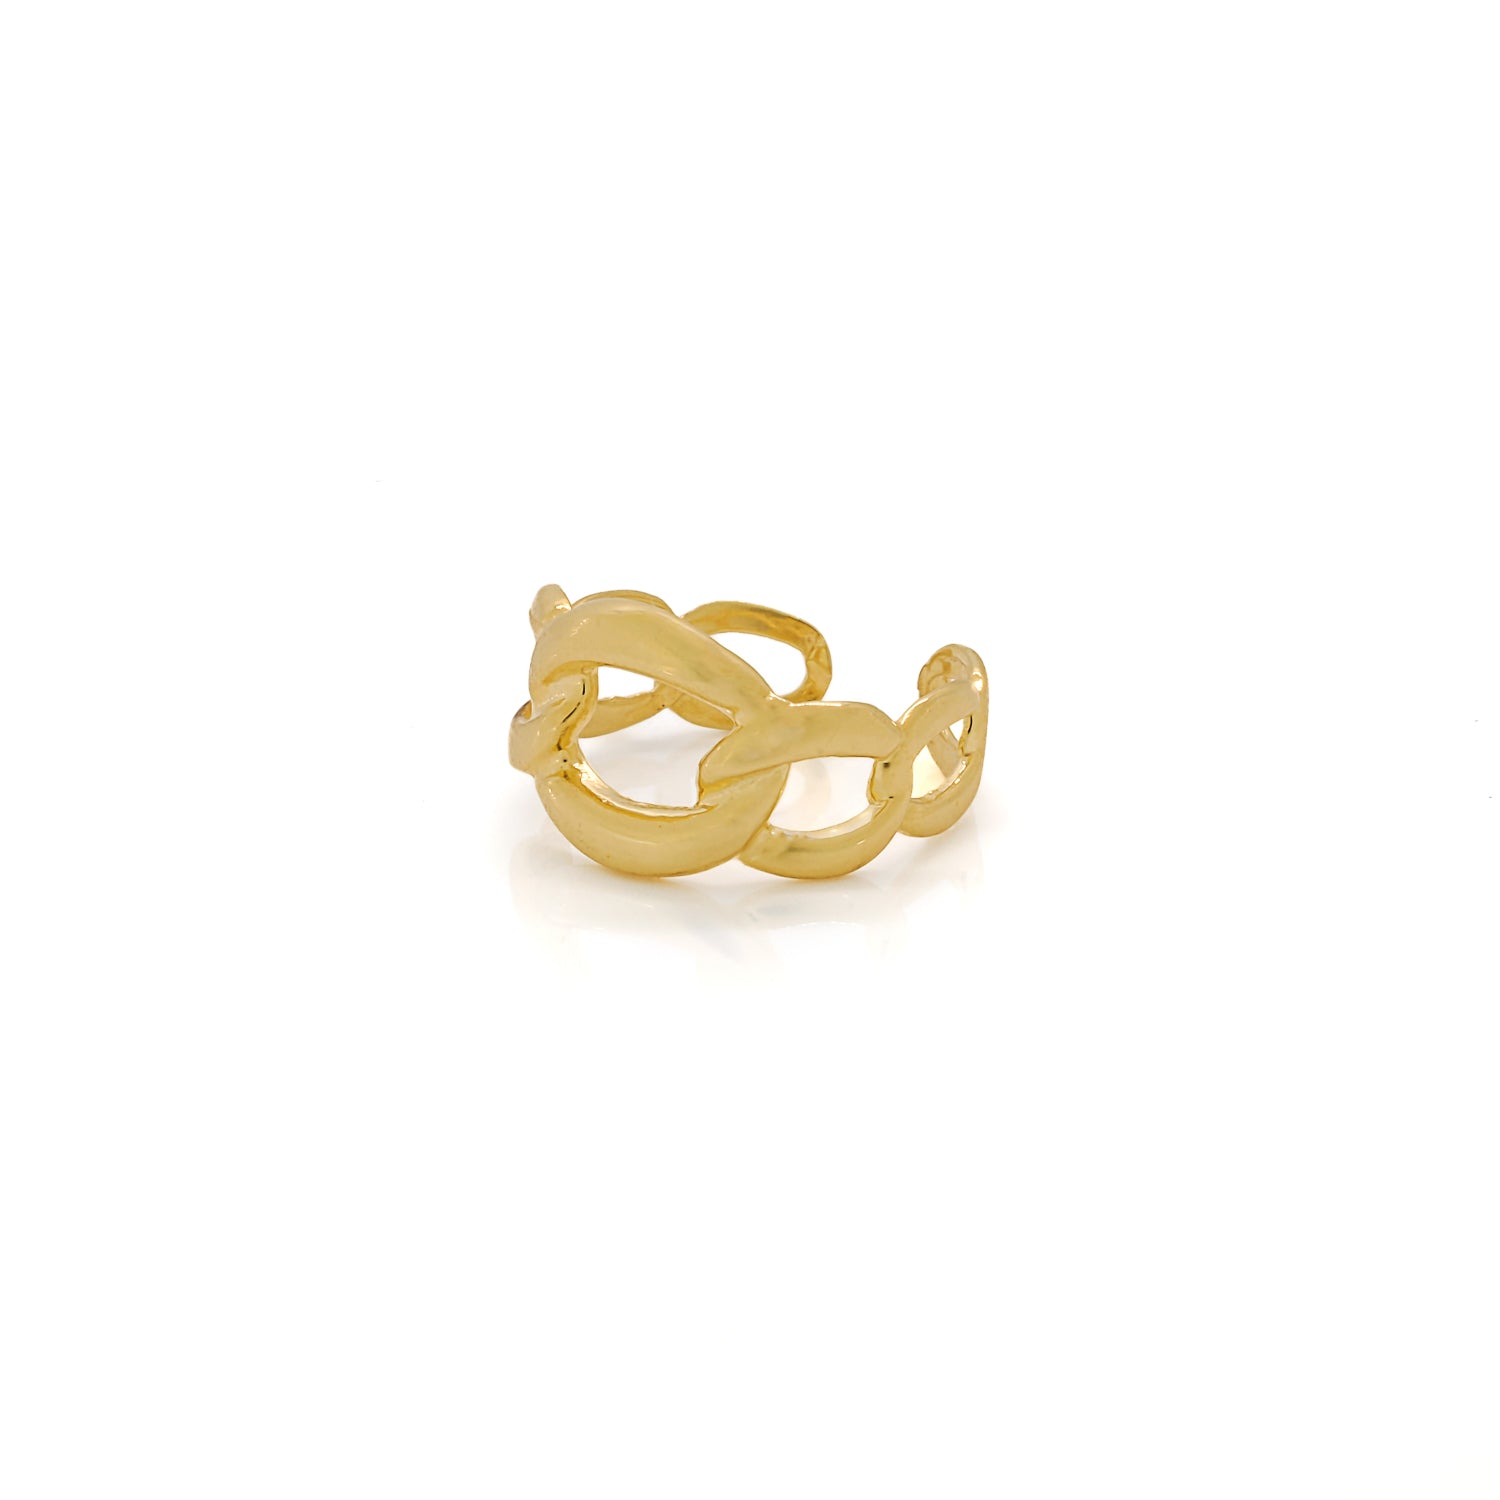 Mira Gold Ring - Sterling Silver and 18K Gold Plated